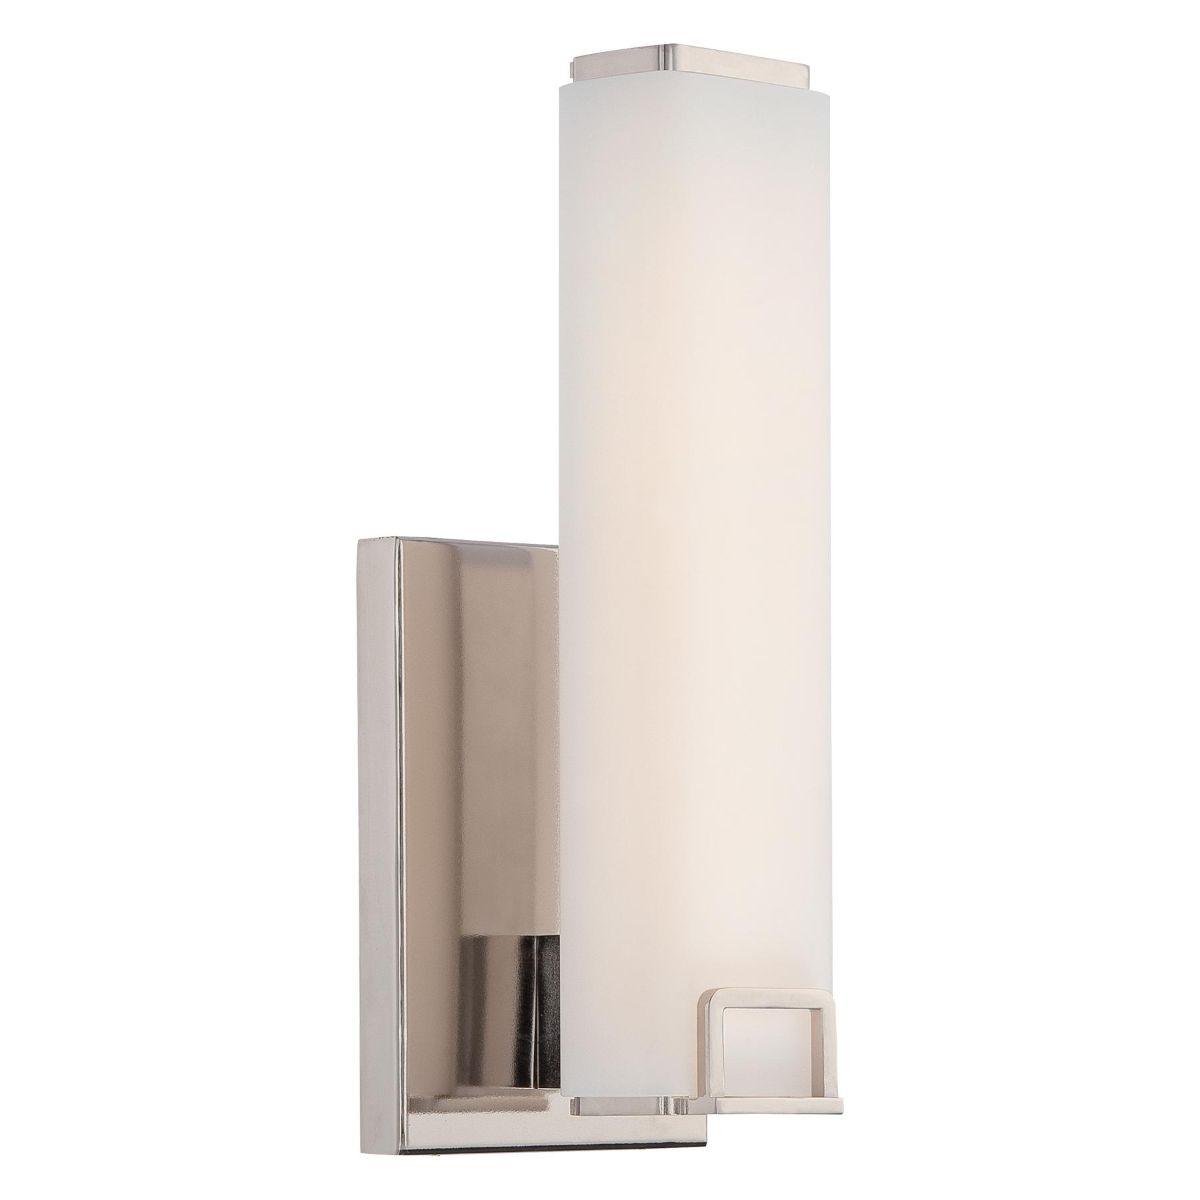 13 in.LED Wall Sconce Polished Nickel finish